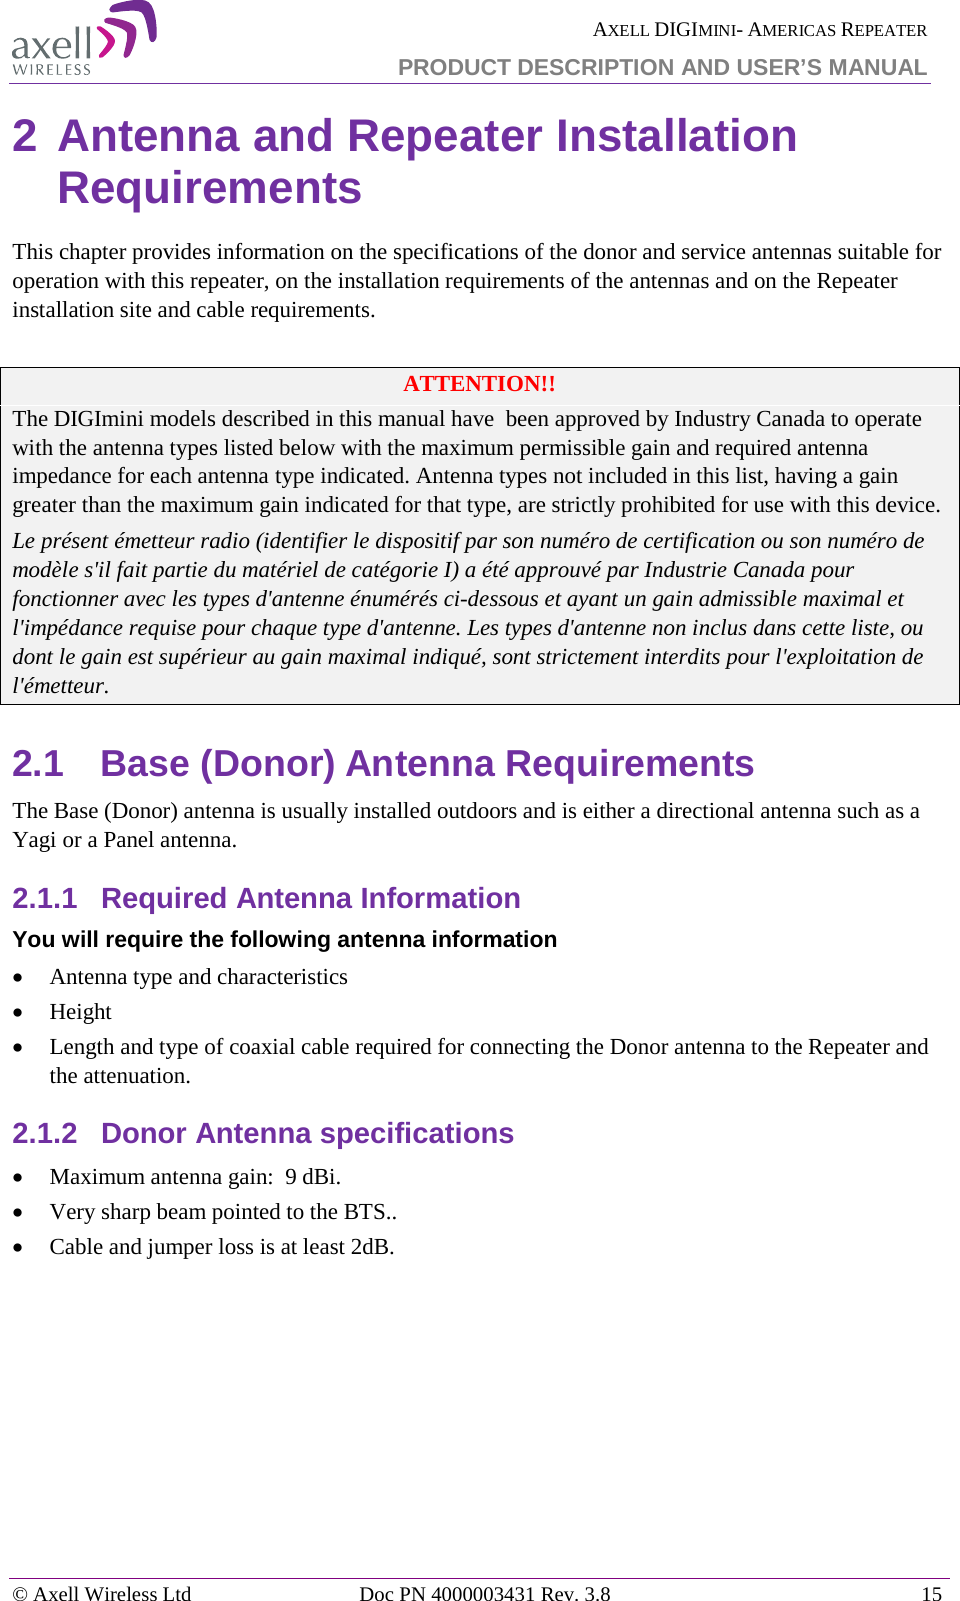  AXELL DIGIMINI- AMERICAS REPEATER PRODUCT DESCRIPTION AND USER’S MANUAL © Axell Wireless Ltd Doc PN 4000003431 Rev. 3.8 15  2 Antenna and Repeater Installation Requirements This chapter provides information on the specifications of the donor and service antennas suitable for operation with this repeater, on the installation requirements of the antennas and on the Repeater installation site and cable requirements.  ATTENTION!! The DIGImini models described in this manual have  been approved by Industry Canada to operate with the antenna types listed below with the maximum permissible gain and required antenna impedance for each antenna type indicated. Antenna types not included in this list, having a gain greater than the maximum gain indicated for that type, are strictly prohibited for use with this device. Le présent émetteur radio (identifier le dispositif par son numéro de certification ou son numéro de modèle s&apos;il fait partie du matériel de catégorie I) a été approuvé par Industrie Canada pour fonctionner avec les types d&apos;antenne énumérés ci-dessous et ayant un gain admissible maximal et l&apos;impédance requise pour chaque type d&apos;antenne. Les types d&apos;antenne non inclus dans cette liste, ou dont le gain est supérieur au gain maximal indiqué, sont strictement interdits pour l&apos;exploitation de l&apos;émetteur. 2.1  Base (Donor) Antenna Requirements The Base (Donor) antenna is usually installed outdoors and is either a directional antenna such as a Yagi or a Panel antenna. 2.1.1  Required Antenna Information You will require the following antenna information • Antenna type and characteristics • Height • Length and type of coaxial cable required for connecting the Donor antenna to the Repeater and the attenuation. 2.1.2  Donor Antenna specifications • Maximum antenna gain:  9 dBi.   • Very sharp beam pointed to the BTS.. • Cable and jumper loss is at least 2dB.   